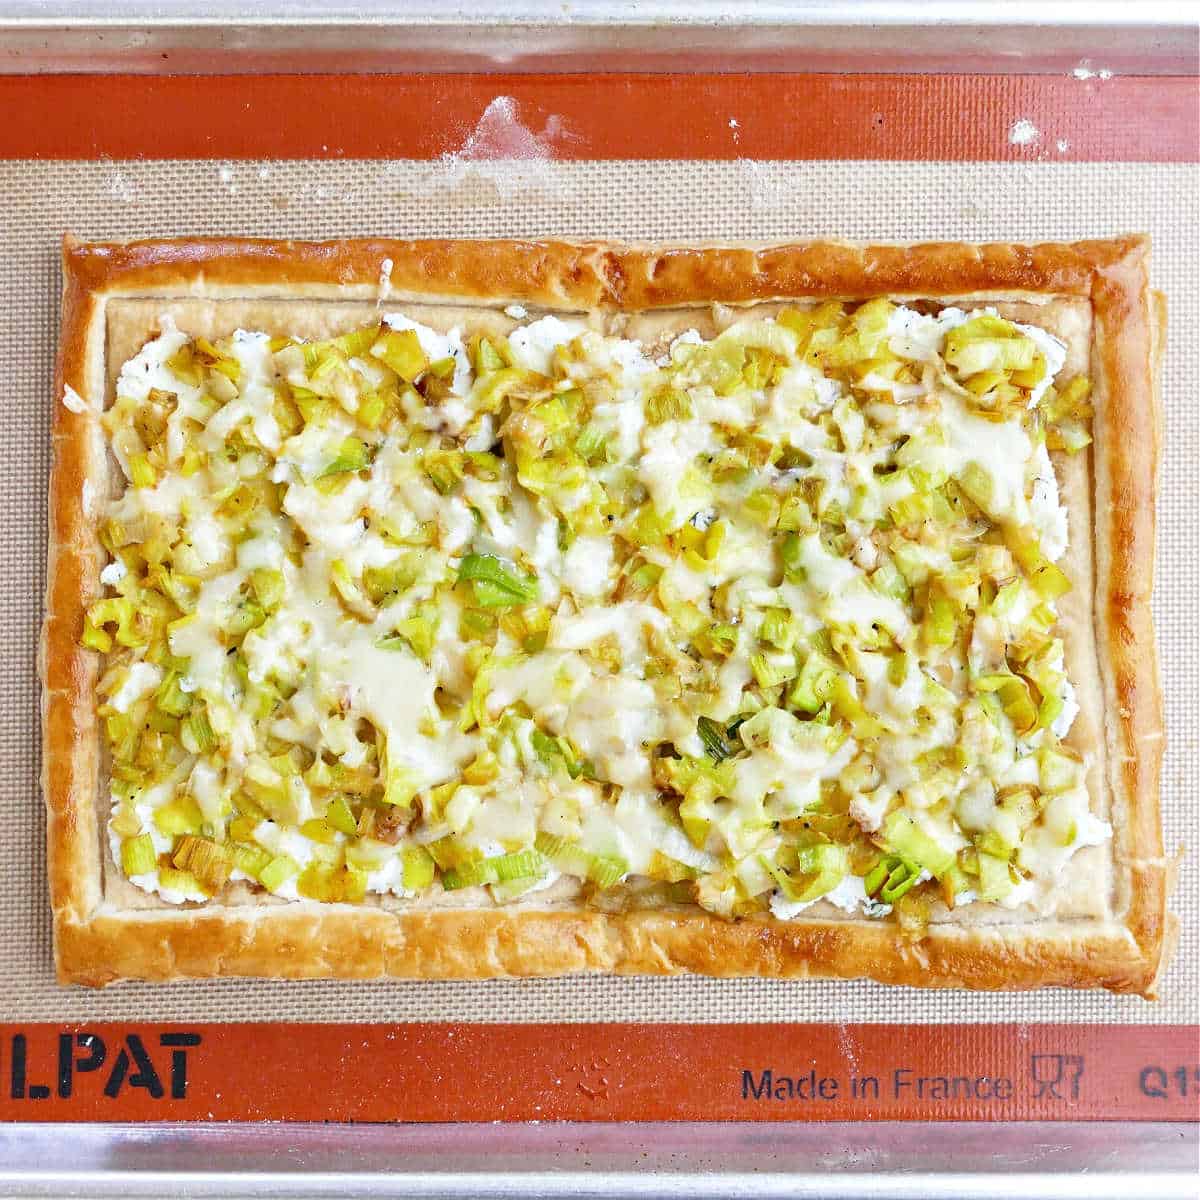 Leek and cheese tart on a baking sheet after cooking.